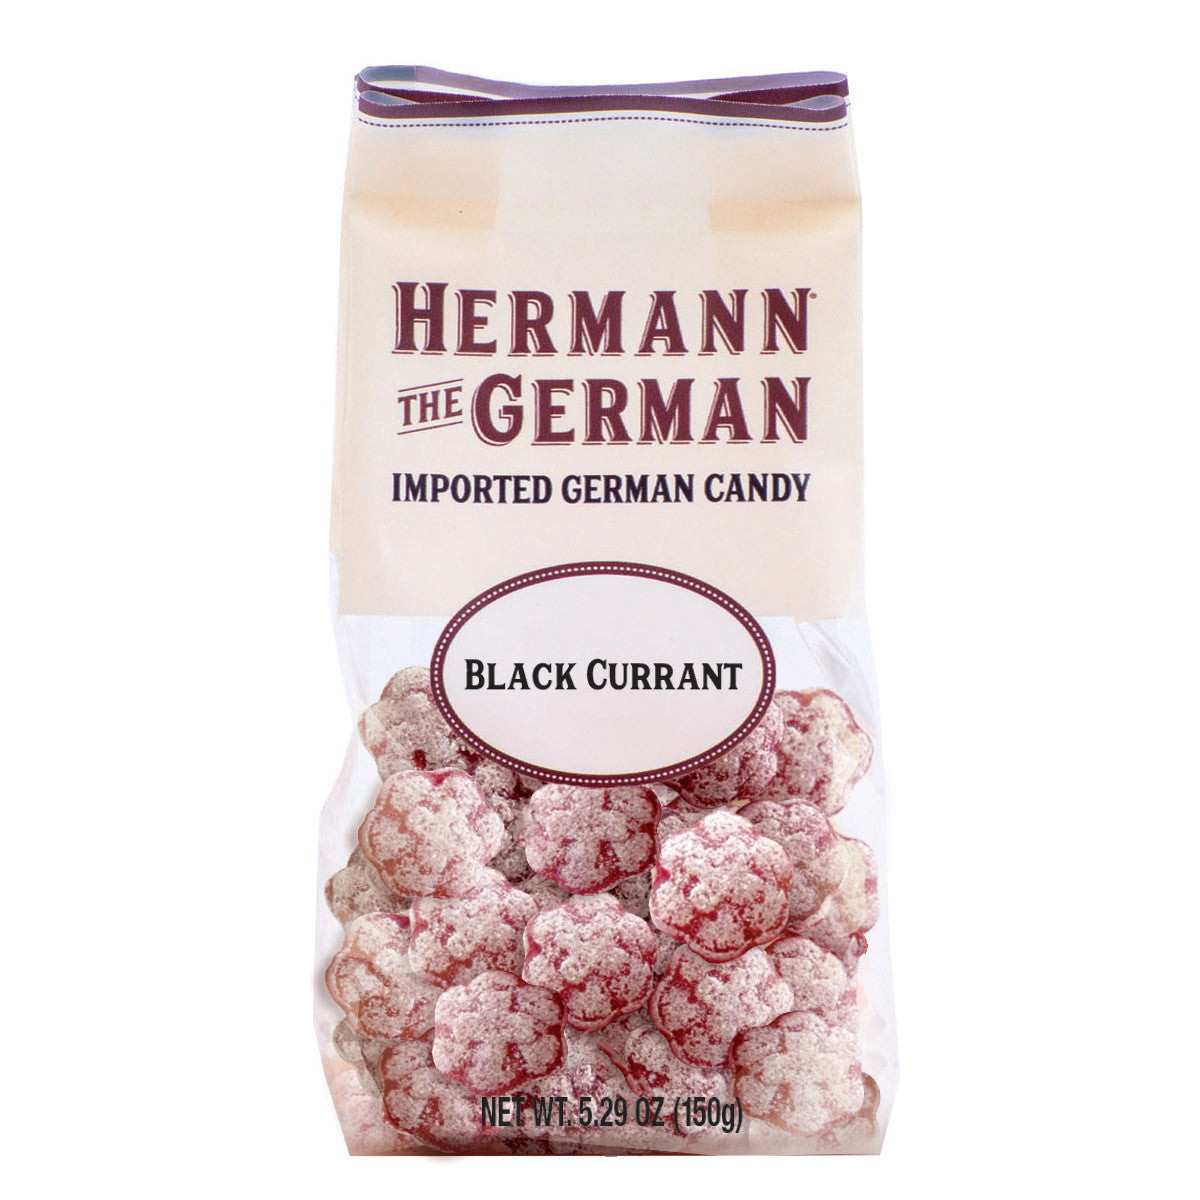 Hermann The German® Imported German Candy